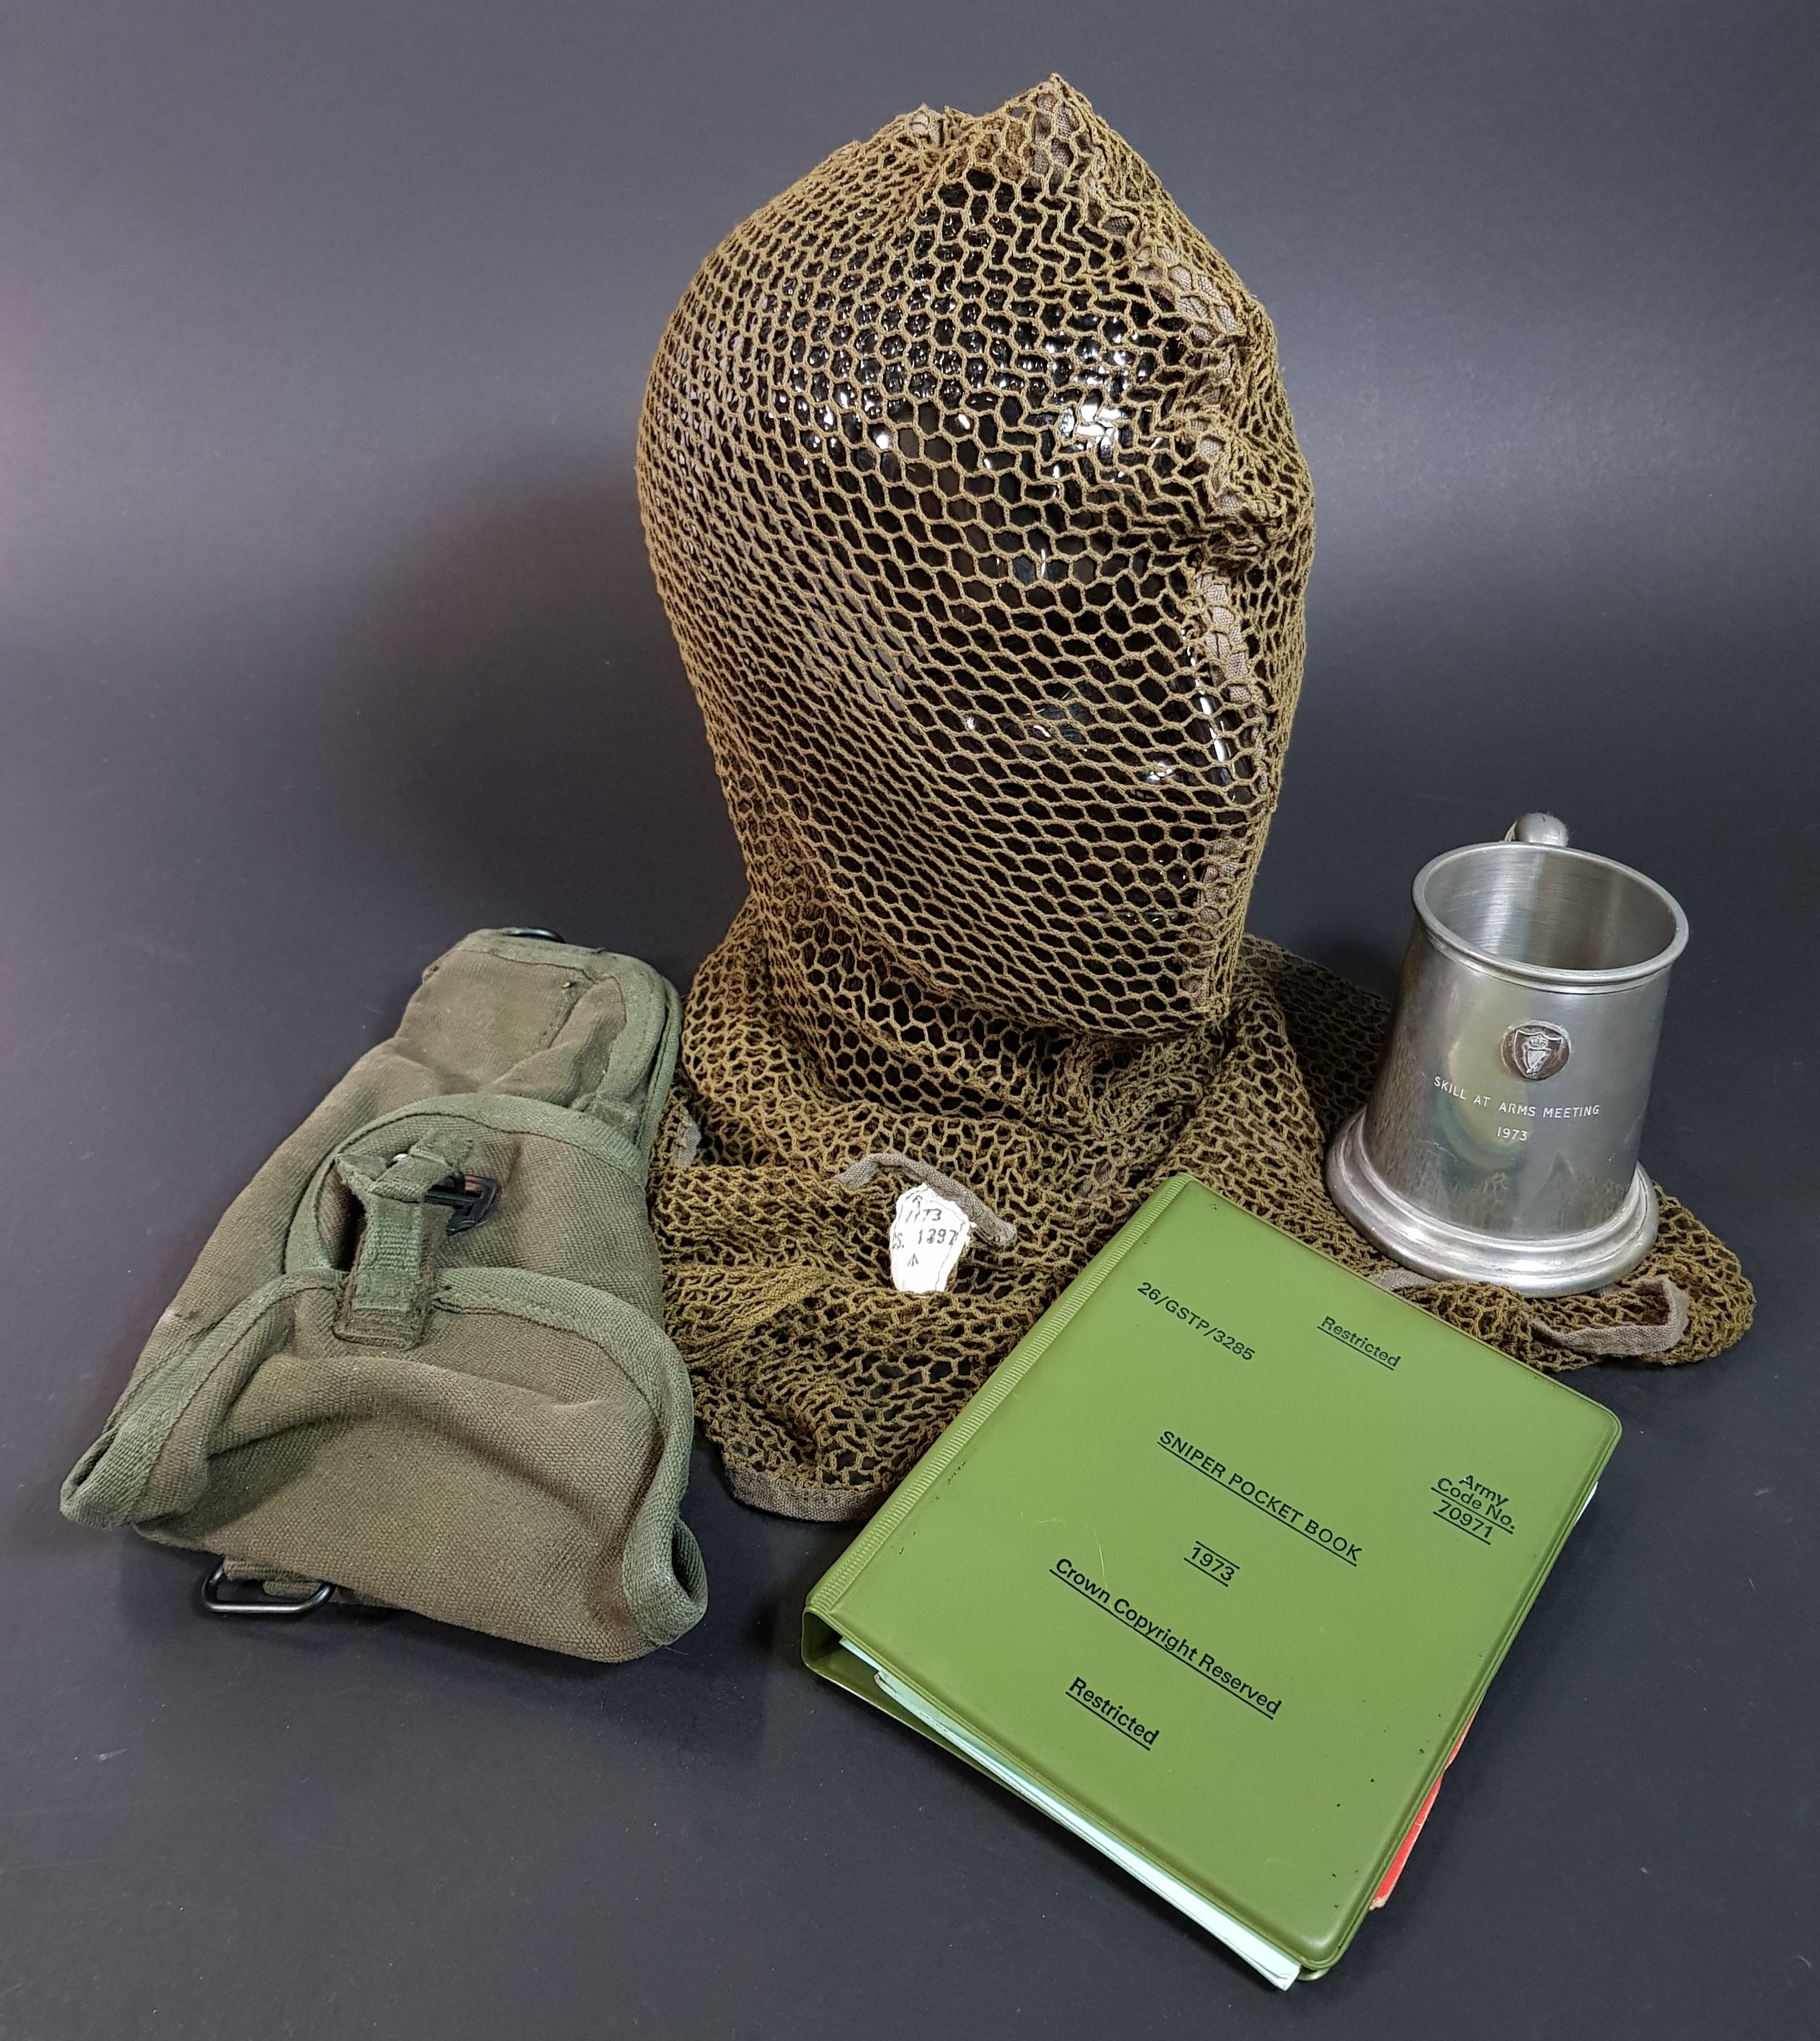 RARE 1970'S NORTHERN IRELAND TROUBLES BRITISH ARMY 1973 SNIPERS HOOD, SNIPERS POCKET BOOK,